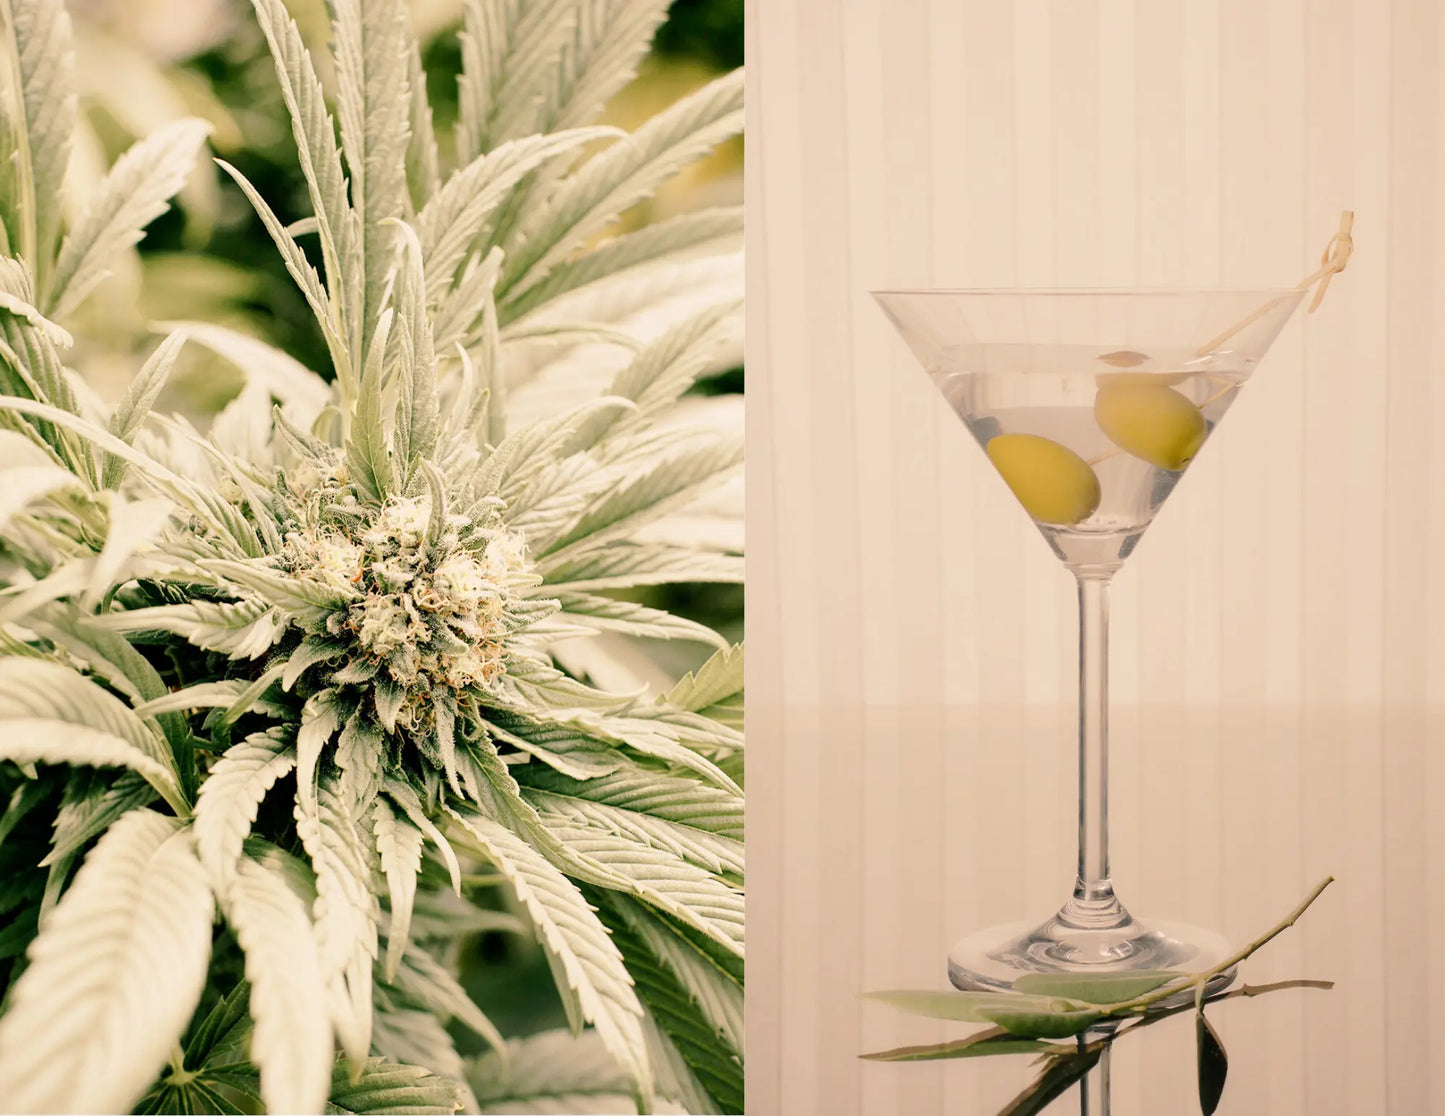 A Sip of Clarity: Reducing your Alcohol Intake & Drinking Cannabis